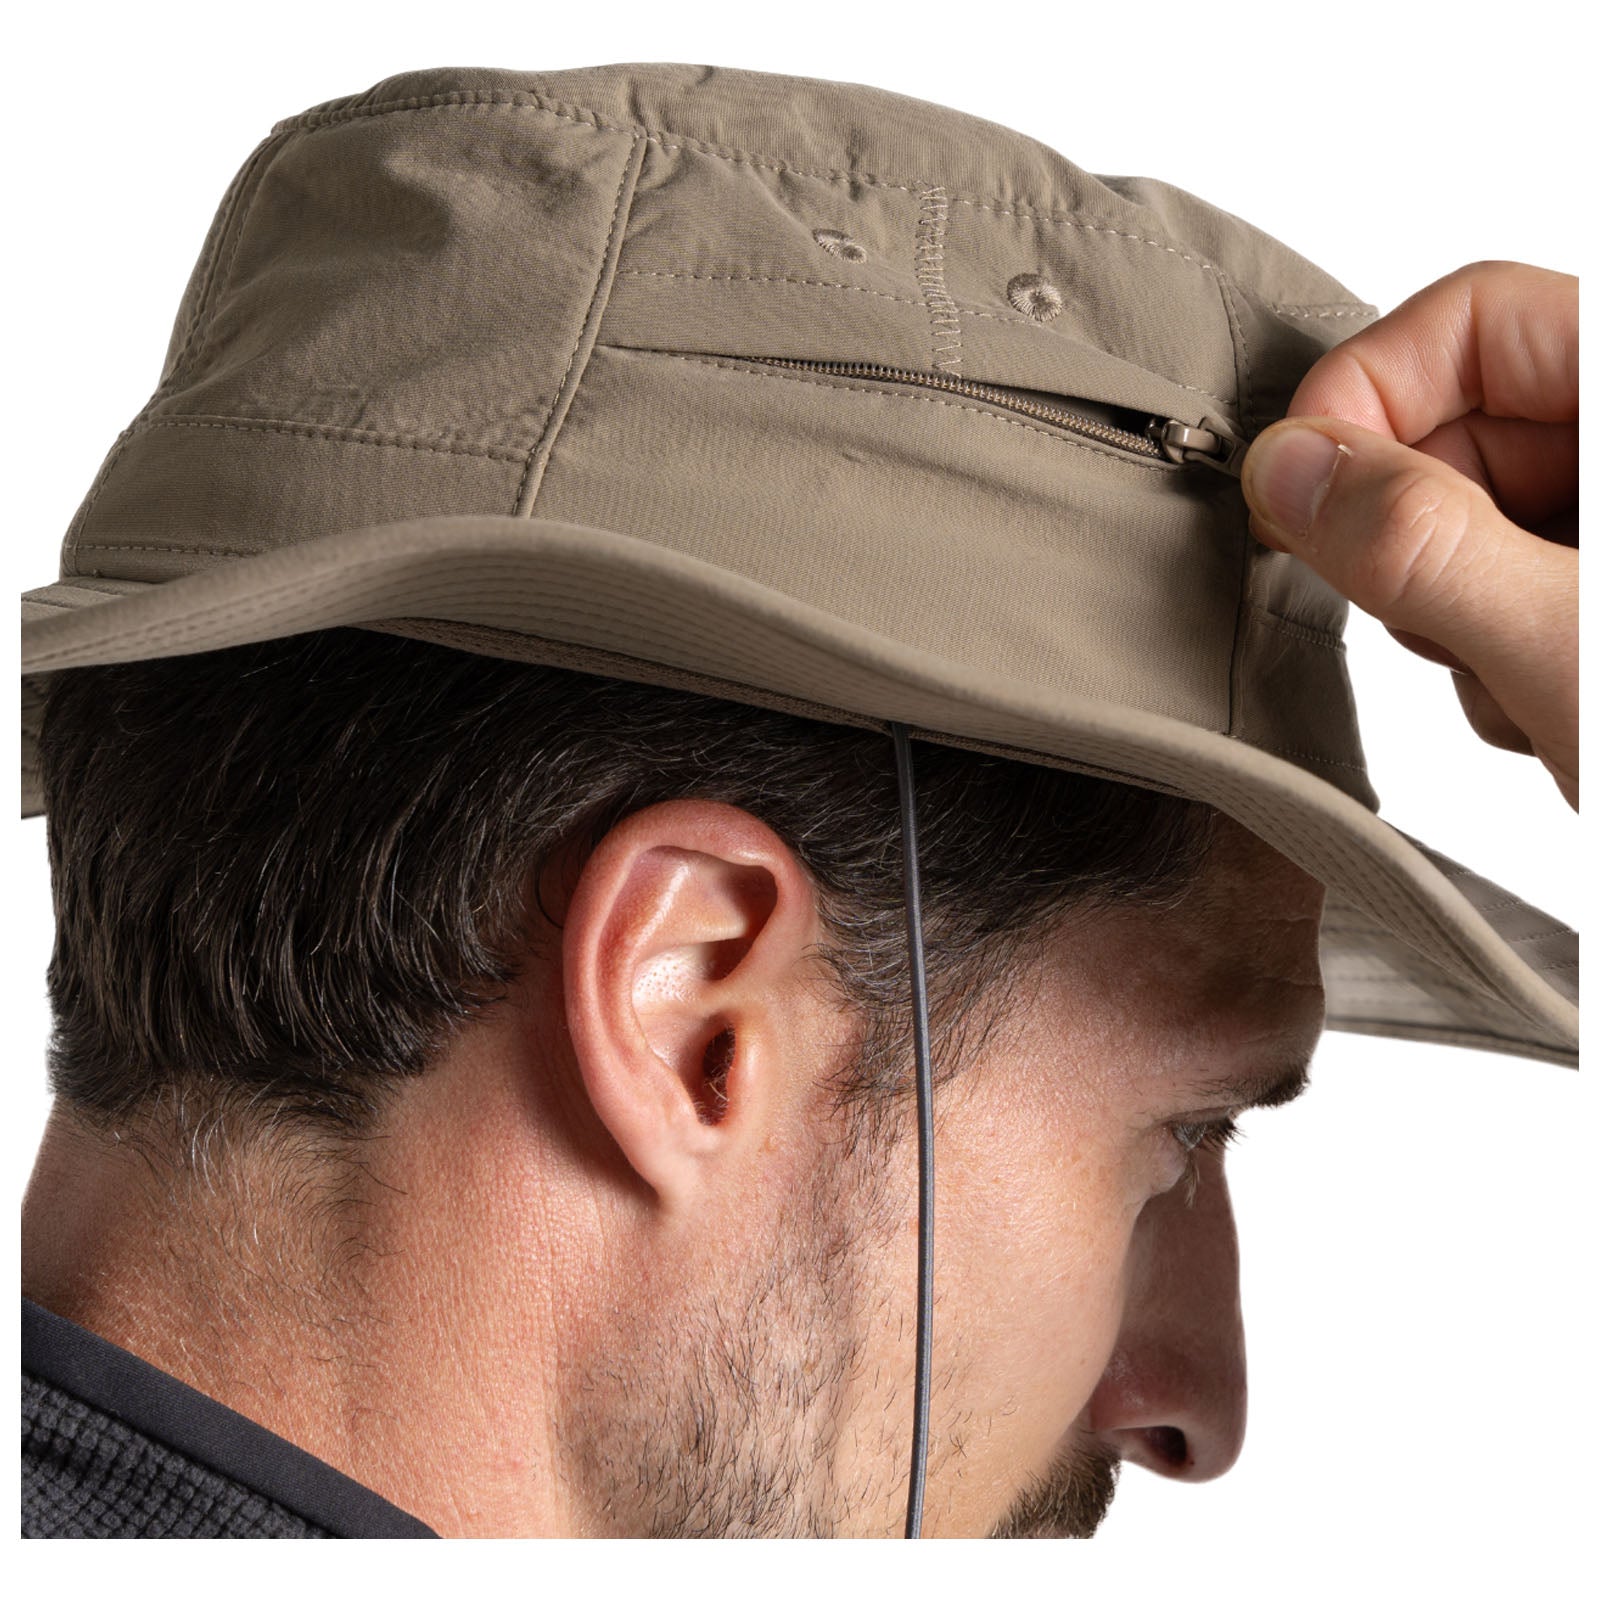 Craghoppers Mens NosiLife Outback Boonie Hat II